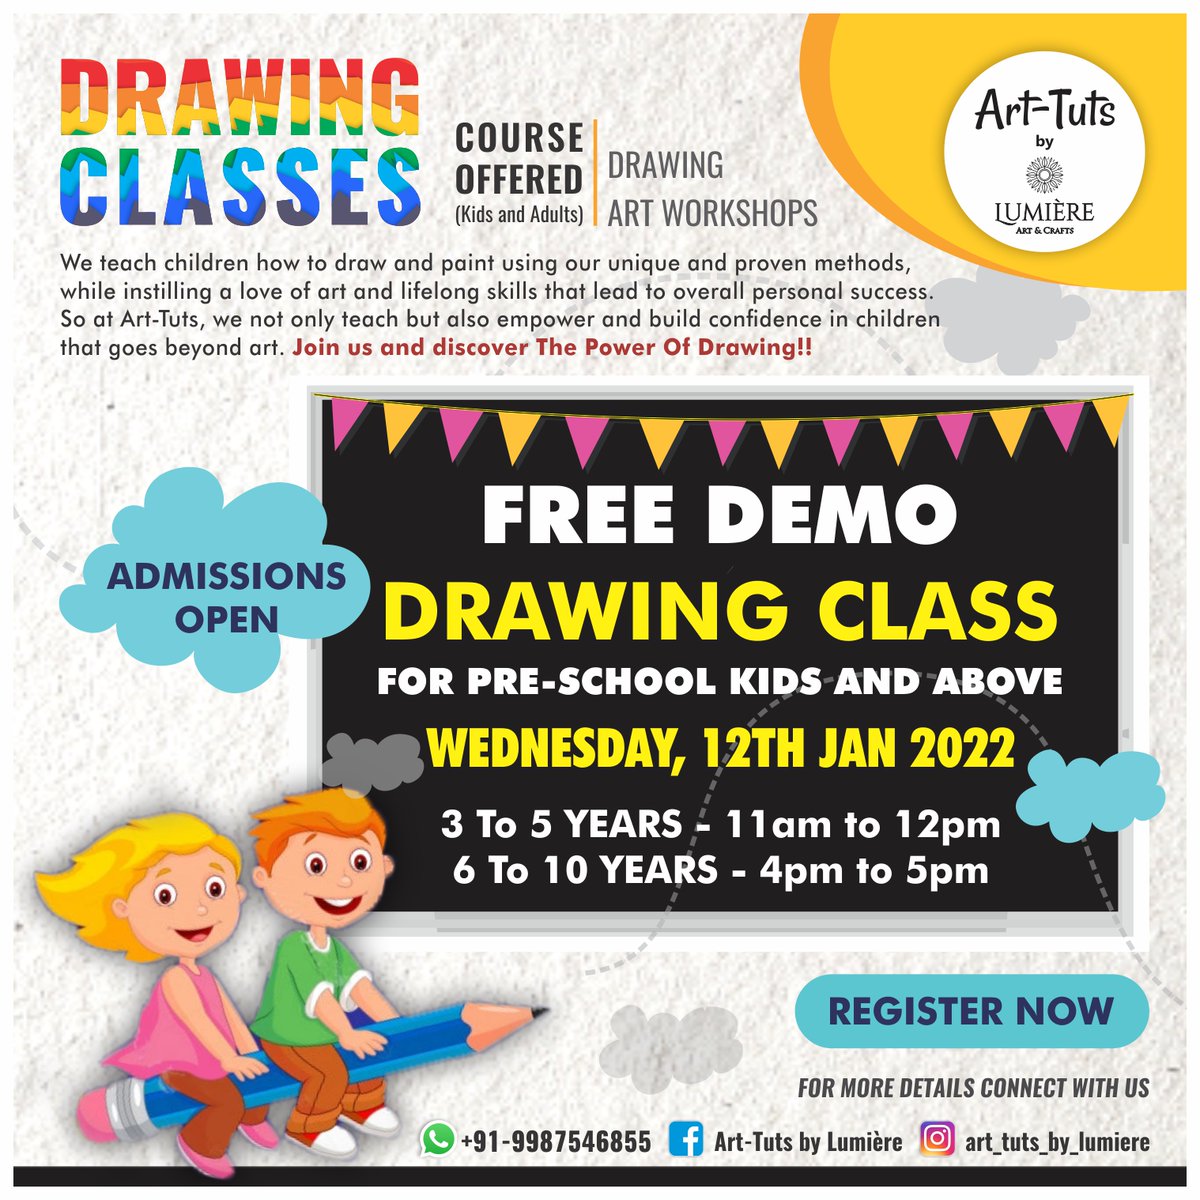 To Register for Demo Drawing Class, please submit this form forms.gle/RYDB11PmKA2sFr…

.

.

For any other queries please connect with us on Whatsapp 91-9987546855 

.

.

wa.me/919987546855

#FreeDemoClass #FreeDemo #kids #drawing #kidsdrawing #kidsdrawingclass #artclass